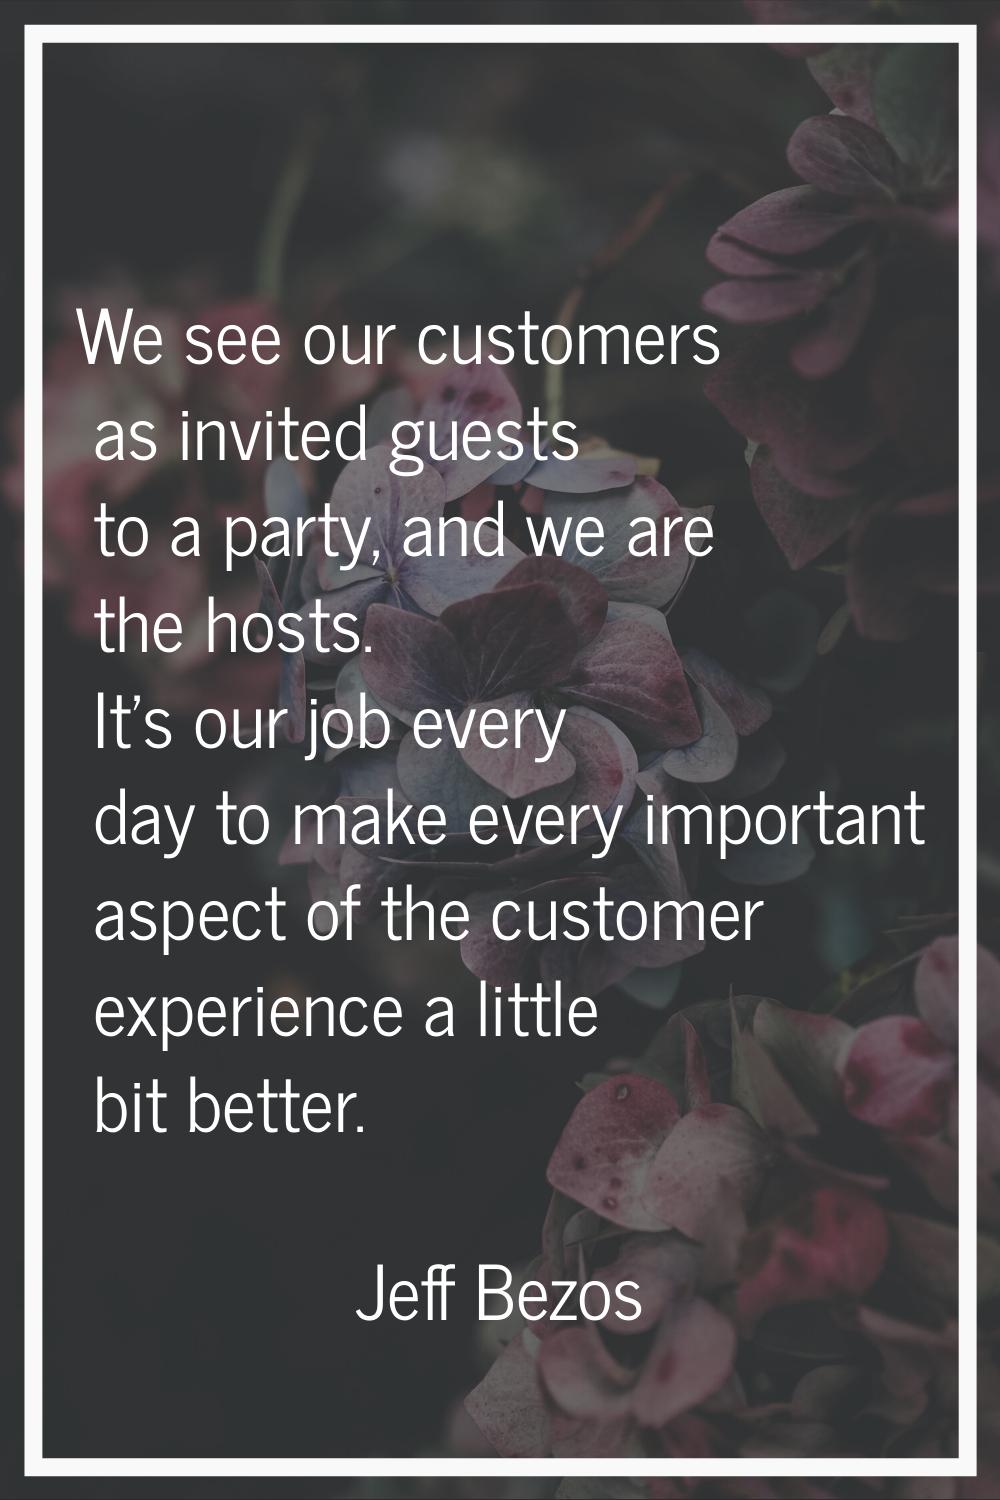 We see our customers as invited guests to a party, and we are the hosts. It's our job every day to 